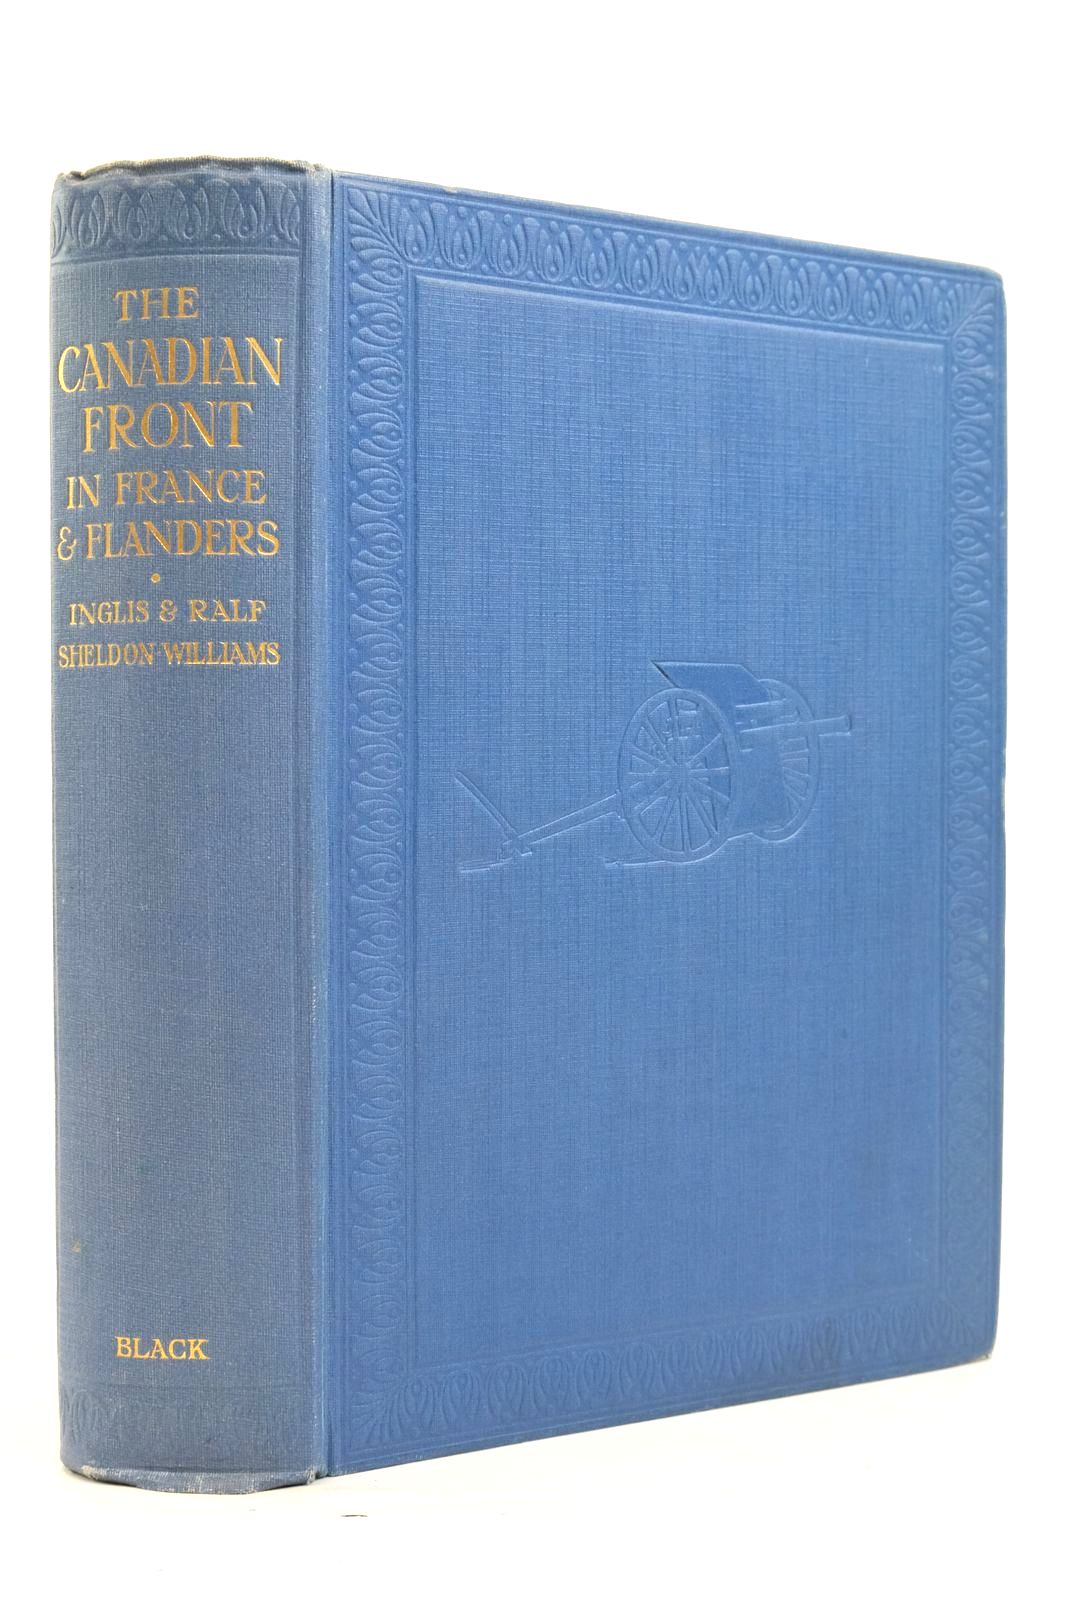 Photo of THE CANADIAN FRONT IN FRANCE AND FLANDERS written by Sheldon-Williams, Ralf Frederic Lardy illustrated by Sheldon-Williams, Inglis published by A. & C. Black Ltd. (STOCK CODE: 2137335)  for sale by Stella & Rose's Books